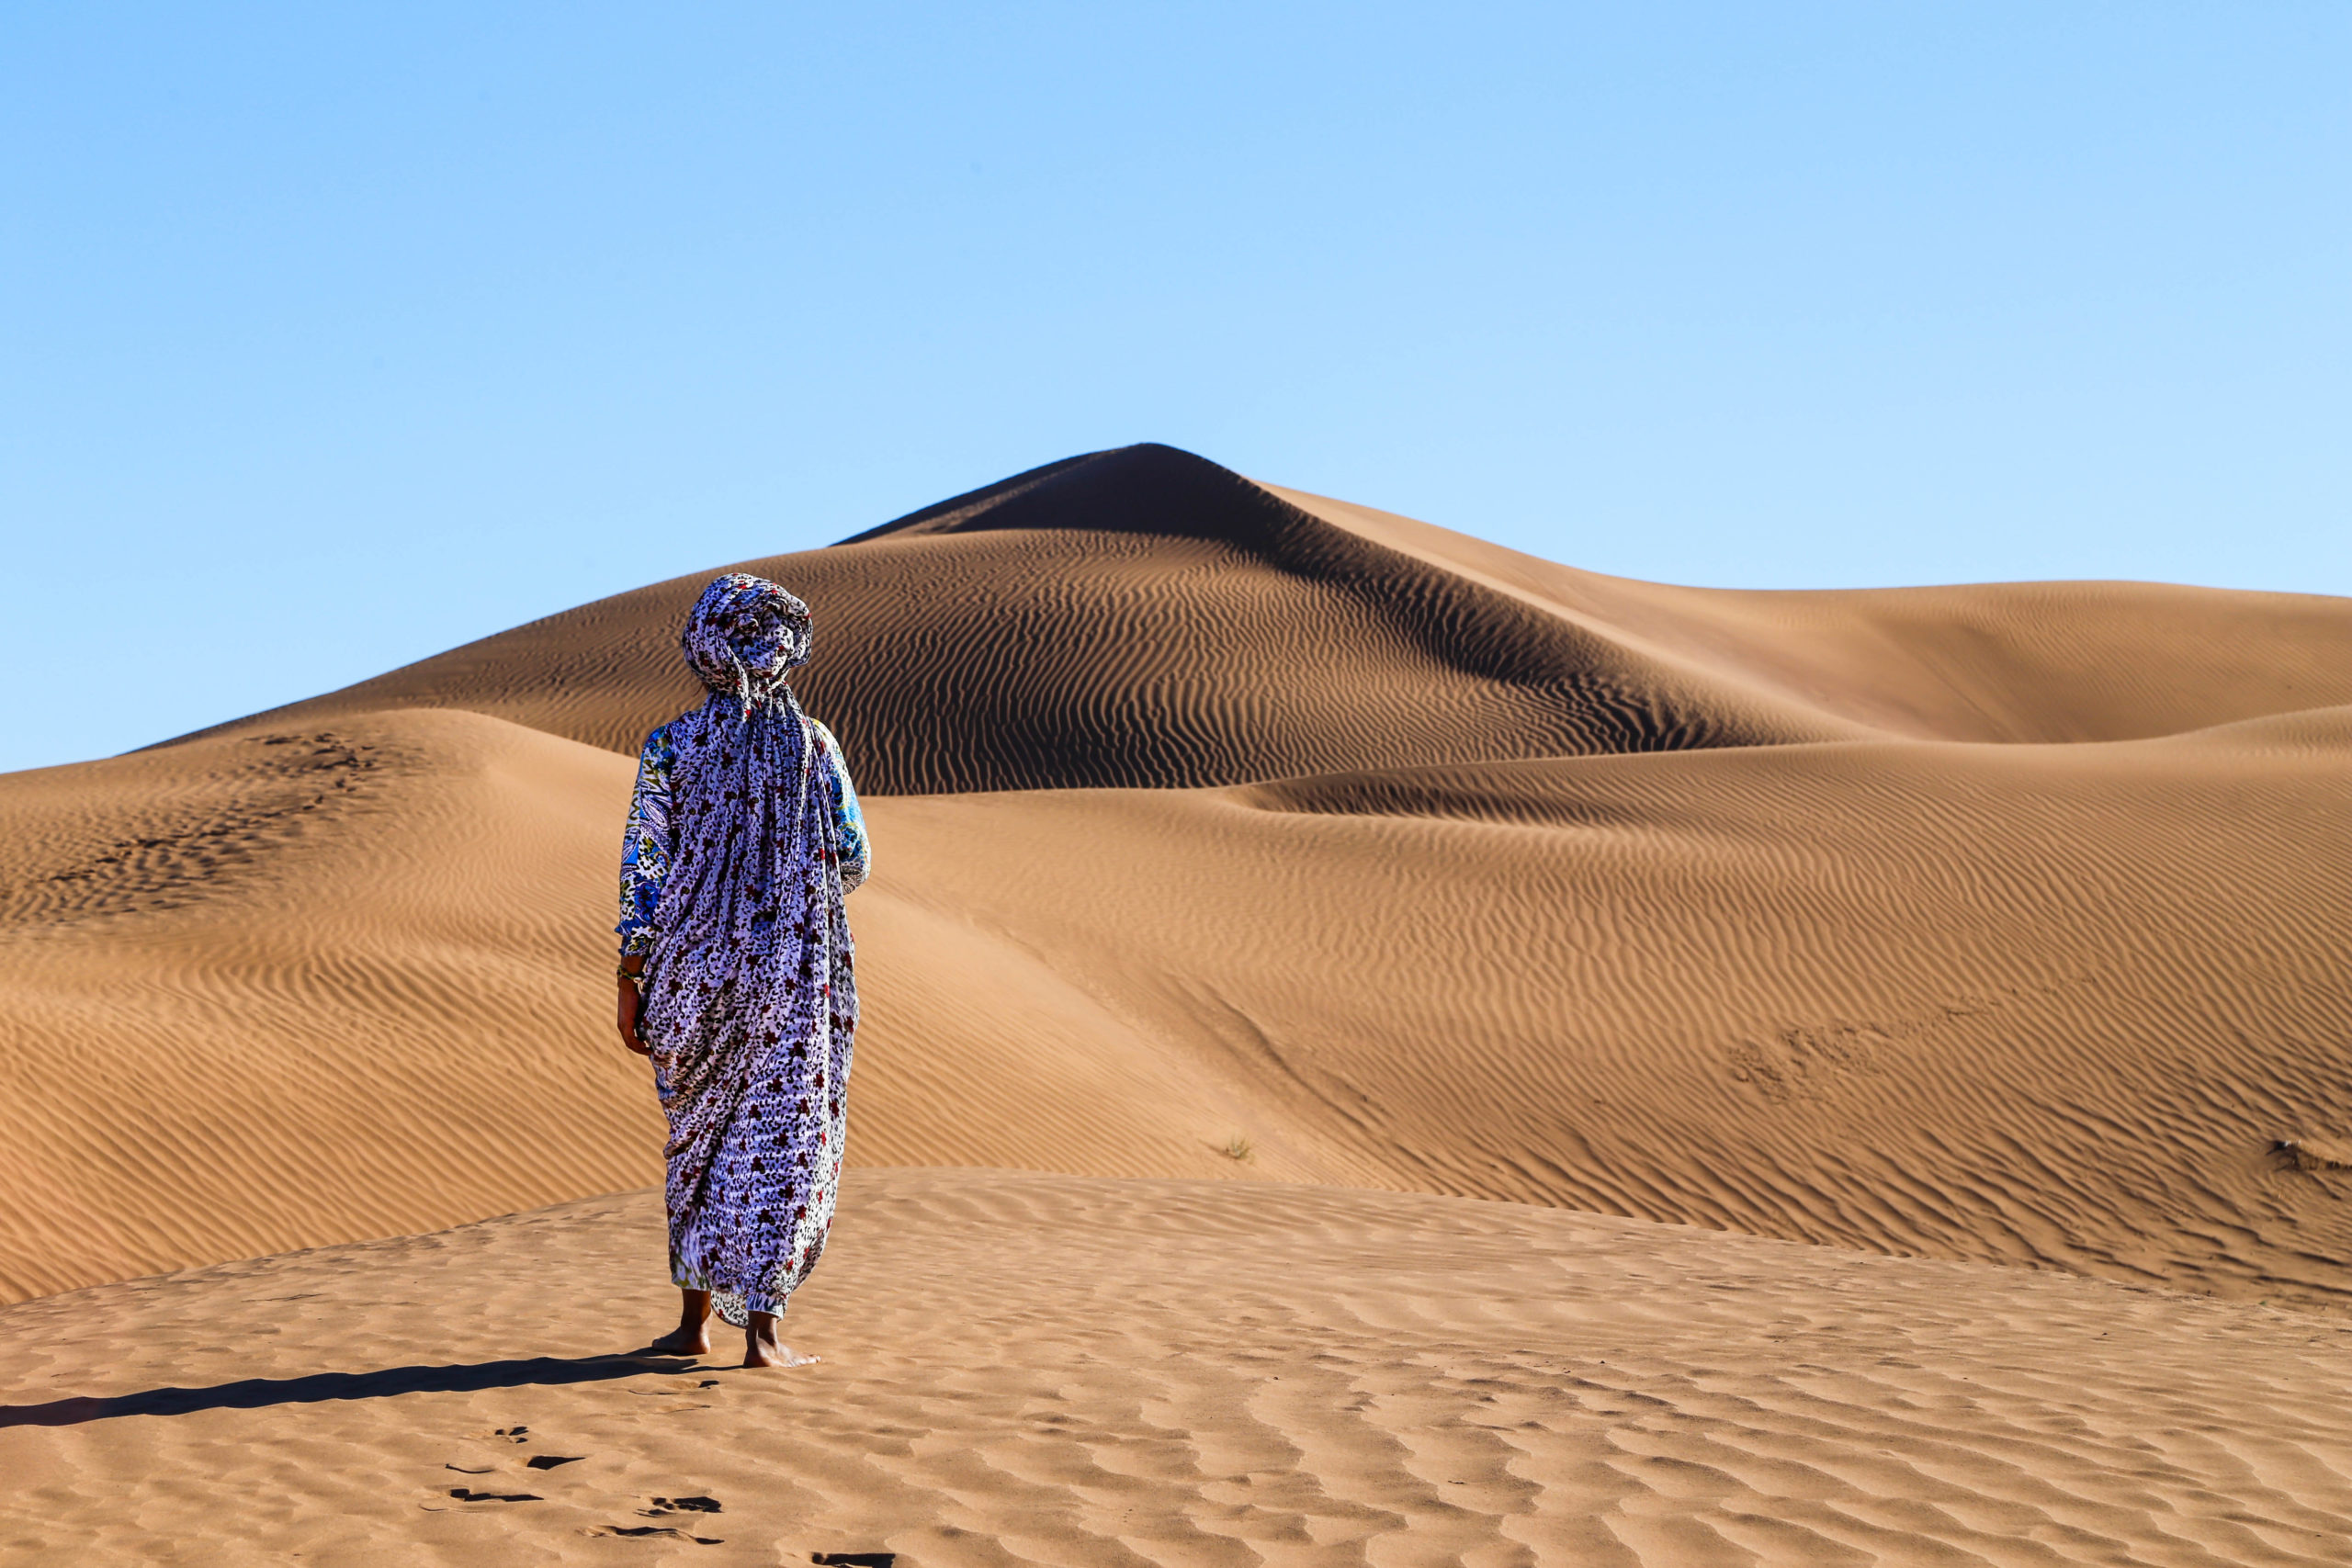 Chaimae Radouani, who is featured in the VR film “The Disappearing Oasis” walks in the desert.